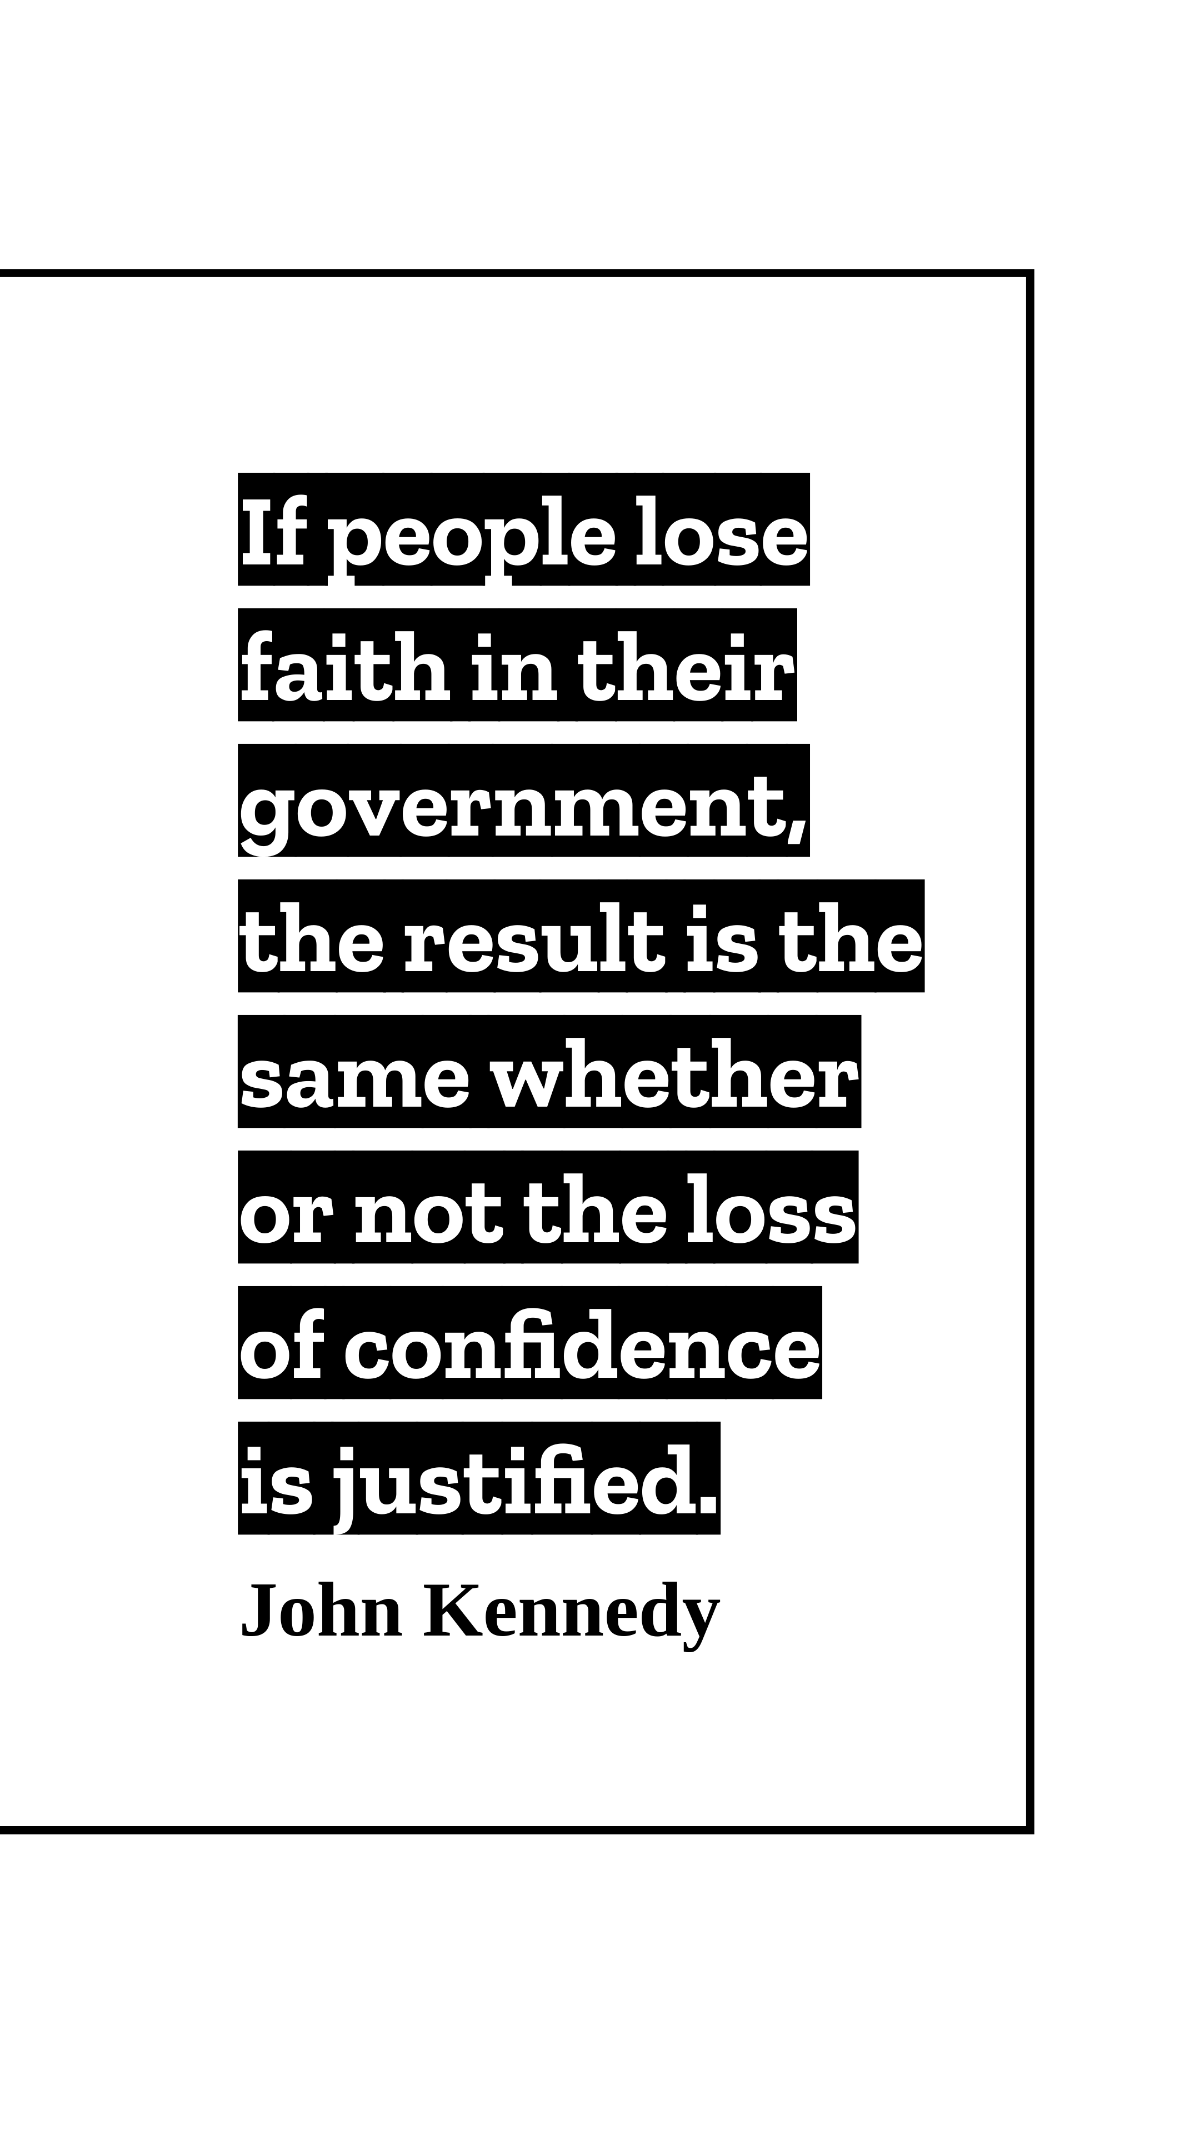 Free John Kennedy - If people lose faith in their government, the result is the same whether or not the loss of confidence is justified. Template